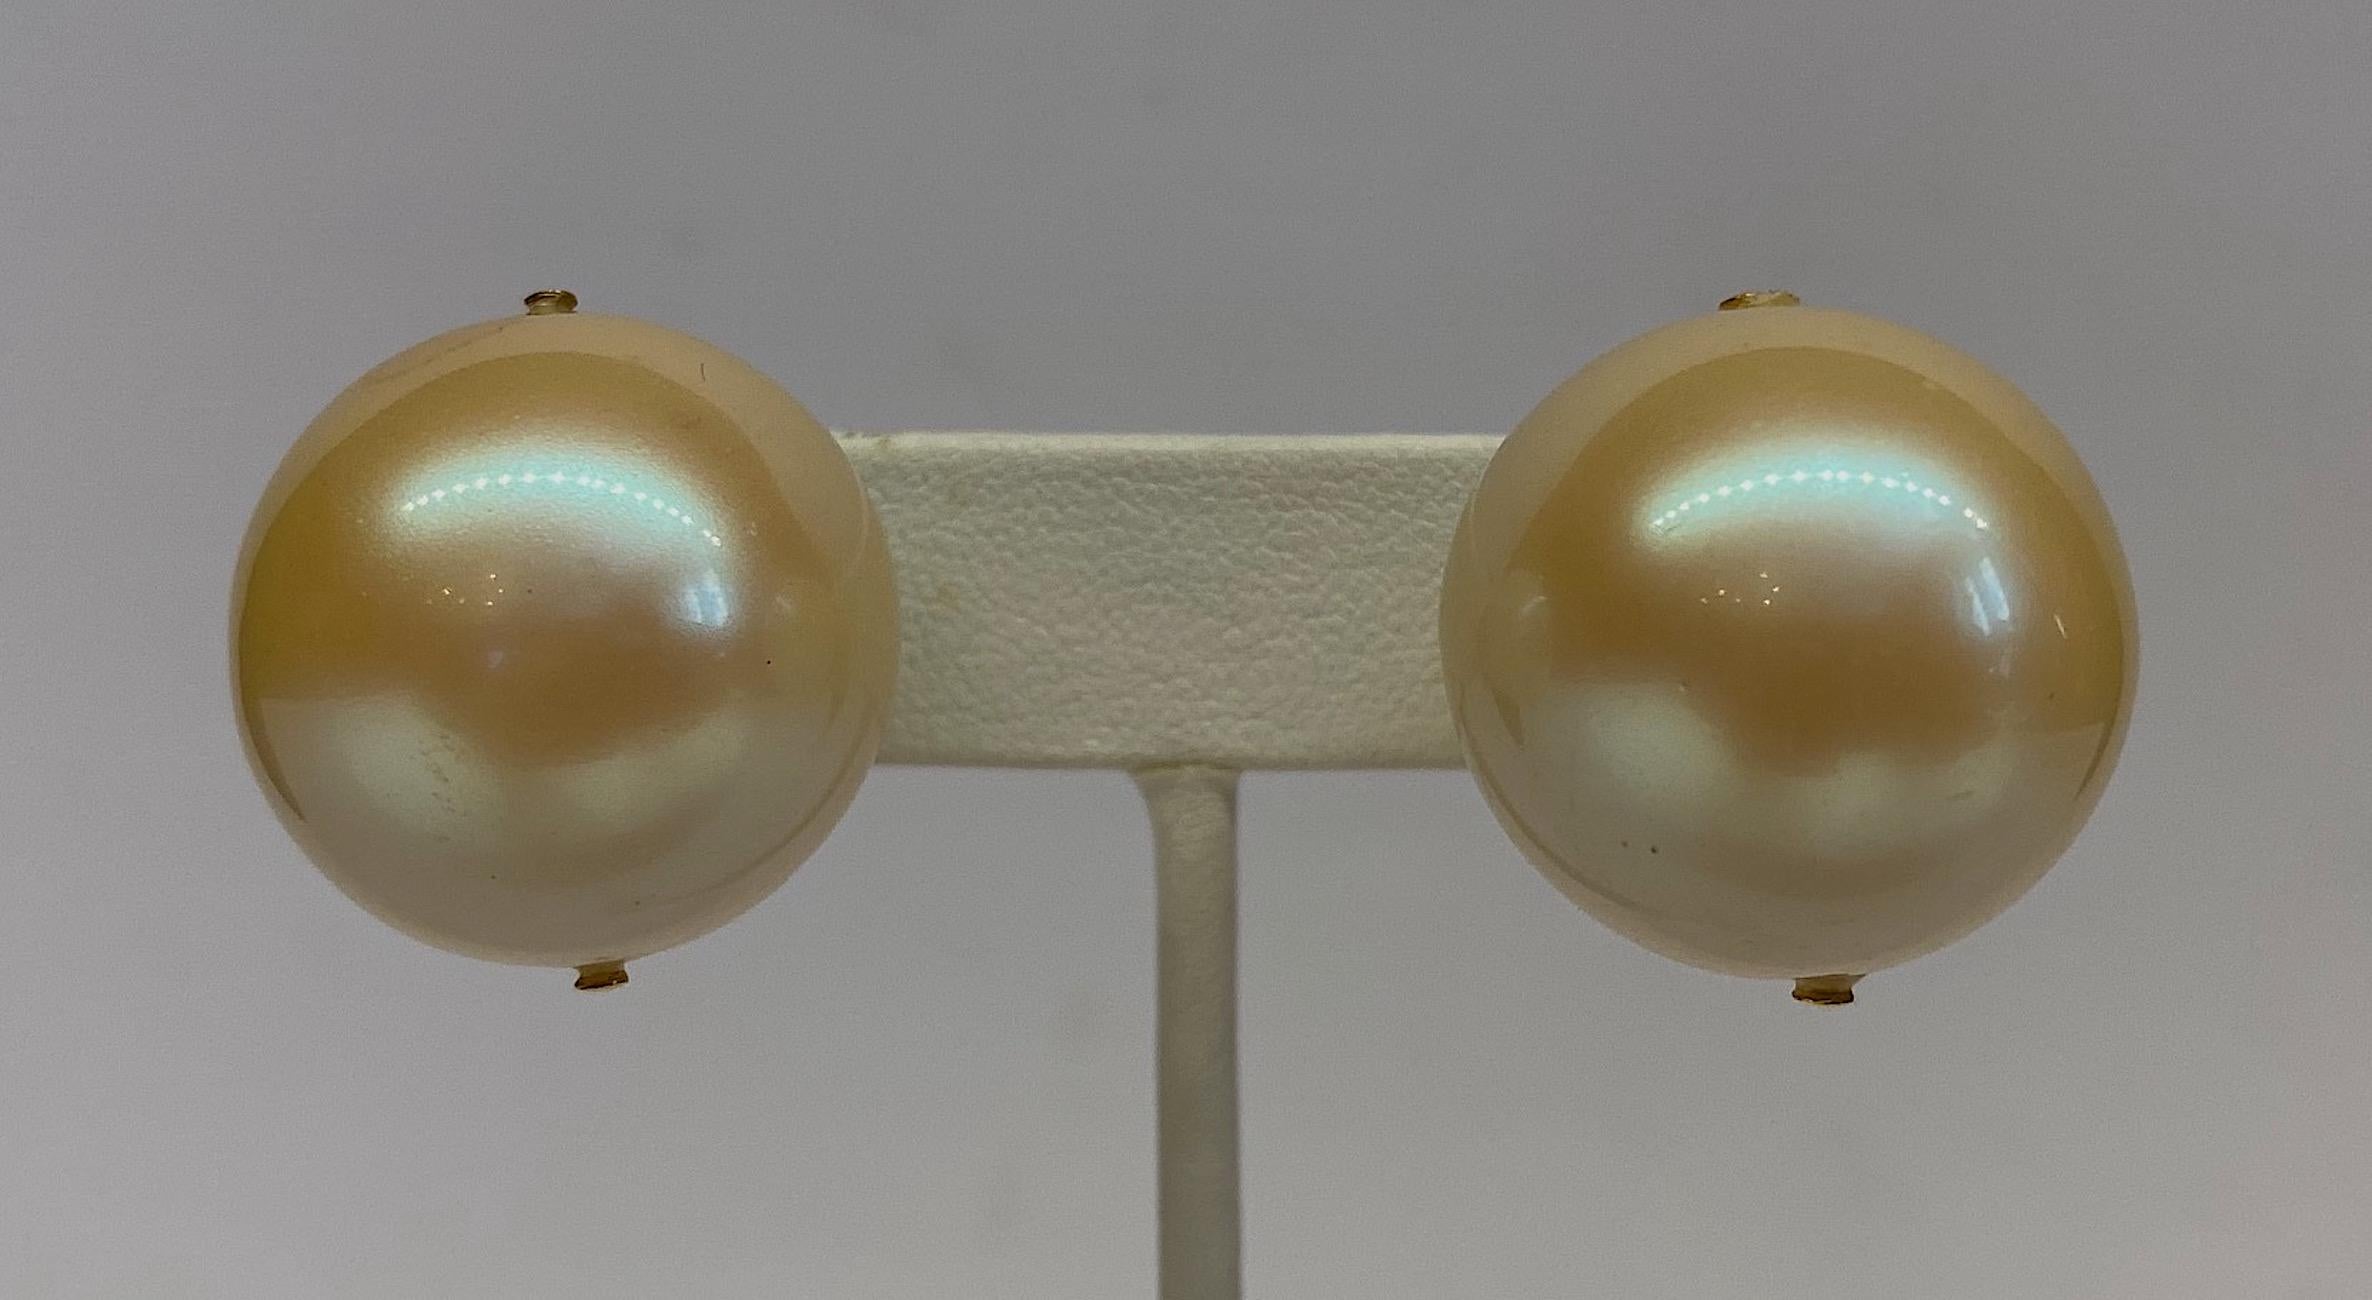 A classic yet eye catching pair of Mila Schon 1980s large 24 mm faux pearl earrings. The pearls are a crazy off white and have gold plate mounting with clip back. Signed on the back mila schon in lower case letters and 